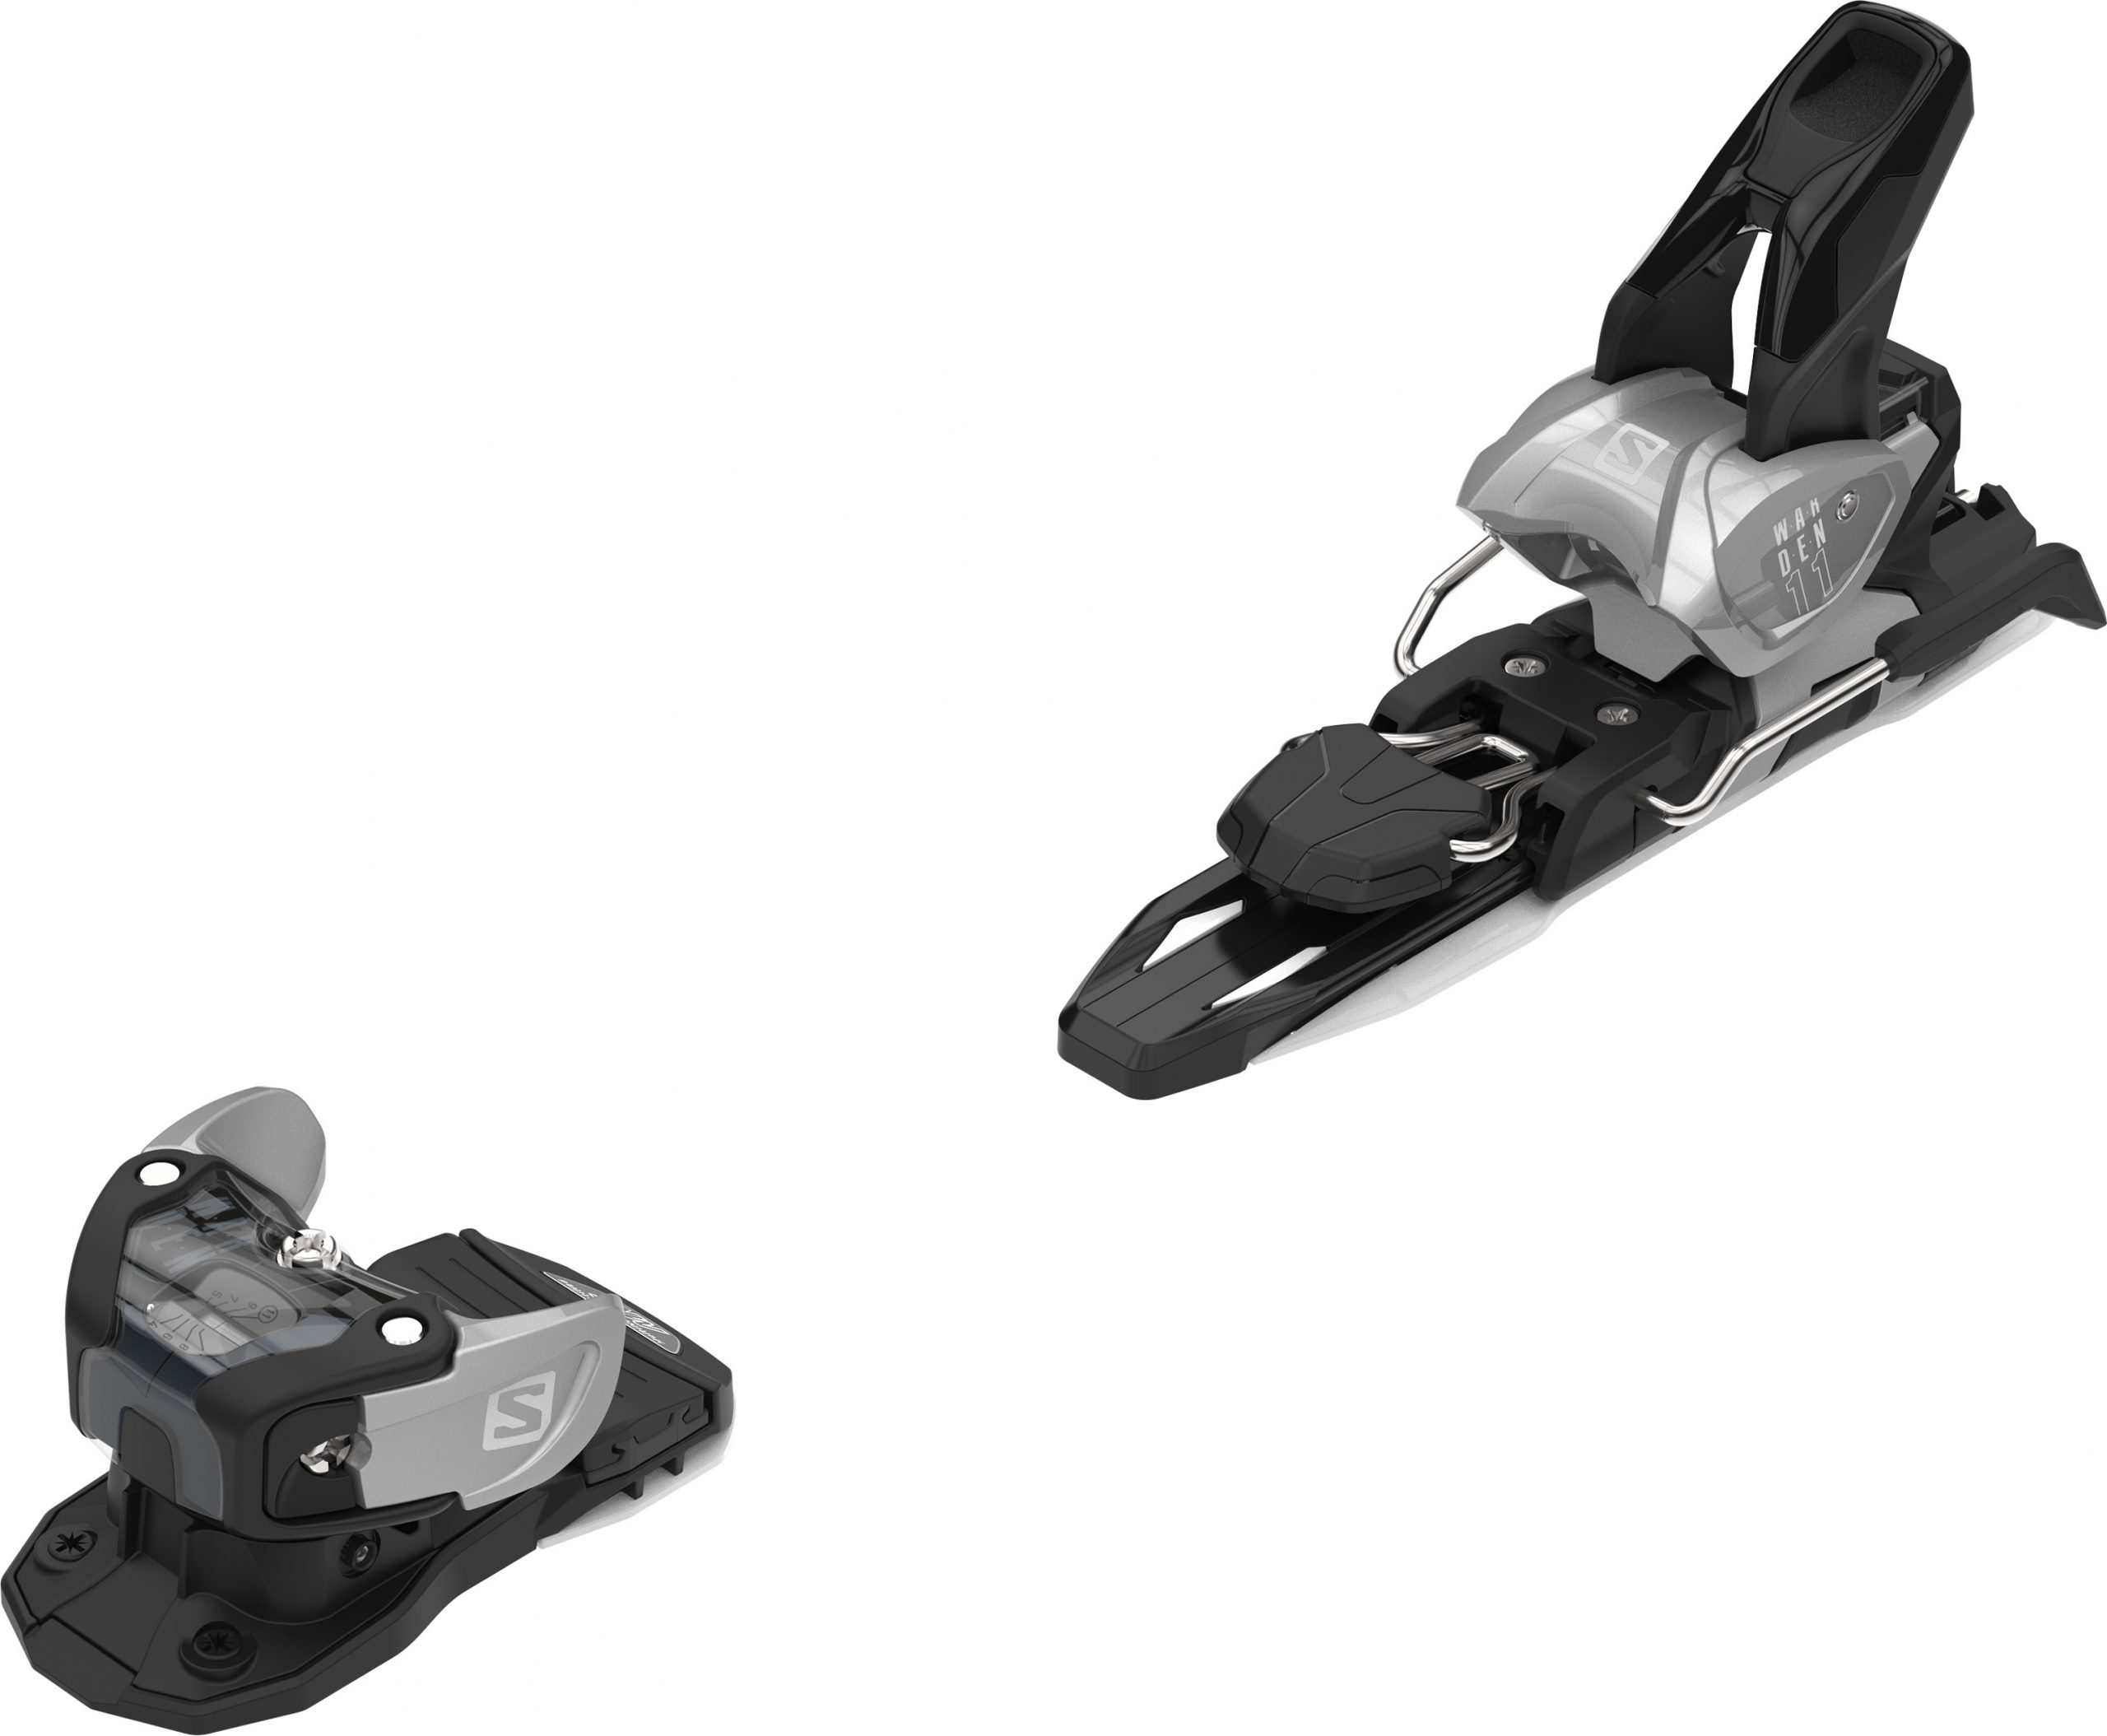 CRAMPONS A NEIGE - SH100 - ADULTE - S A XL